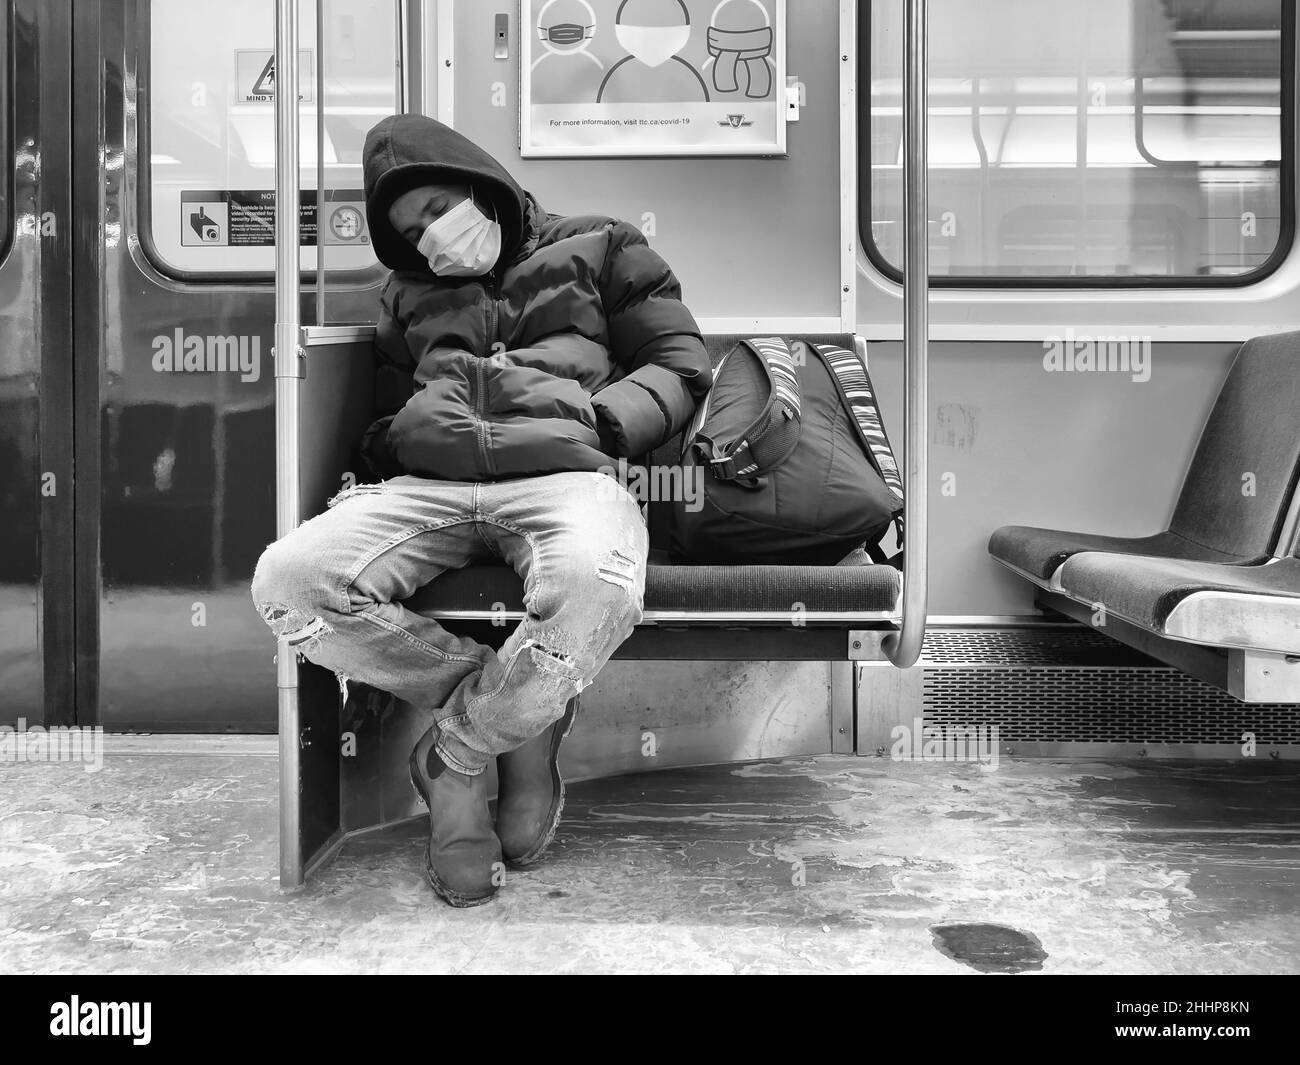 Toronto, Canada-January 22, 2022: A man sleeping in a subway train with protective face mask Stock Photo